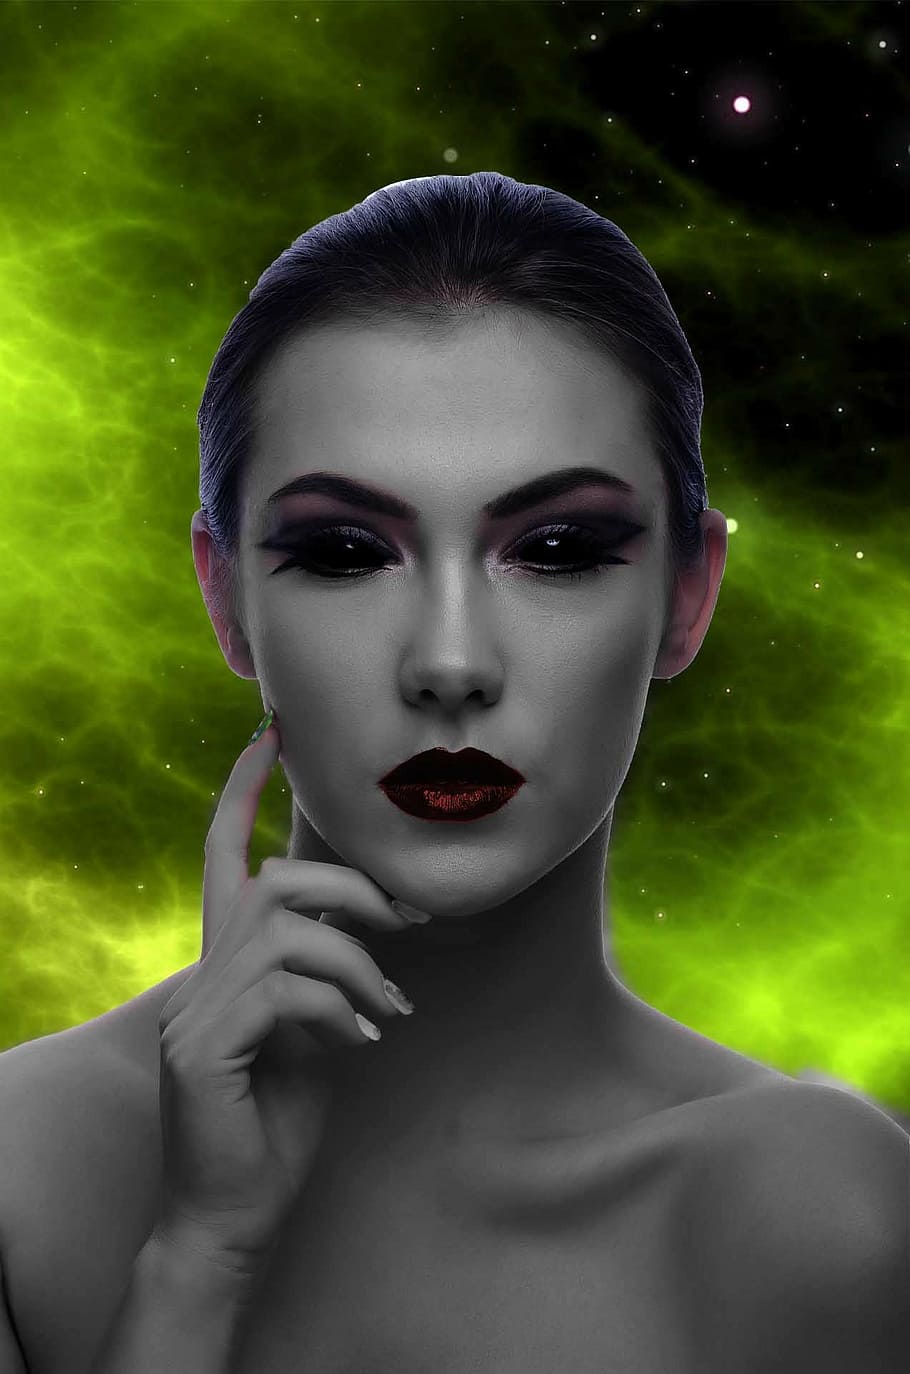 woman, touching, face, universe, alien, portrait, martians, like you, black and white, make-up